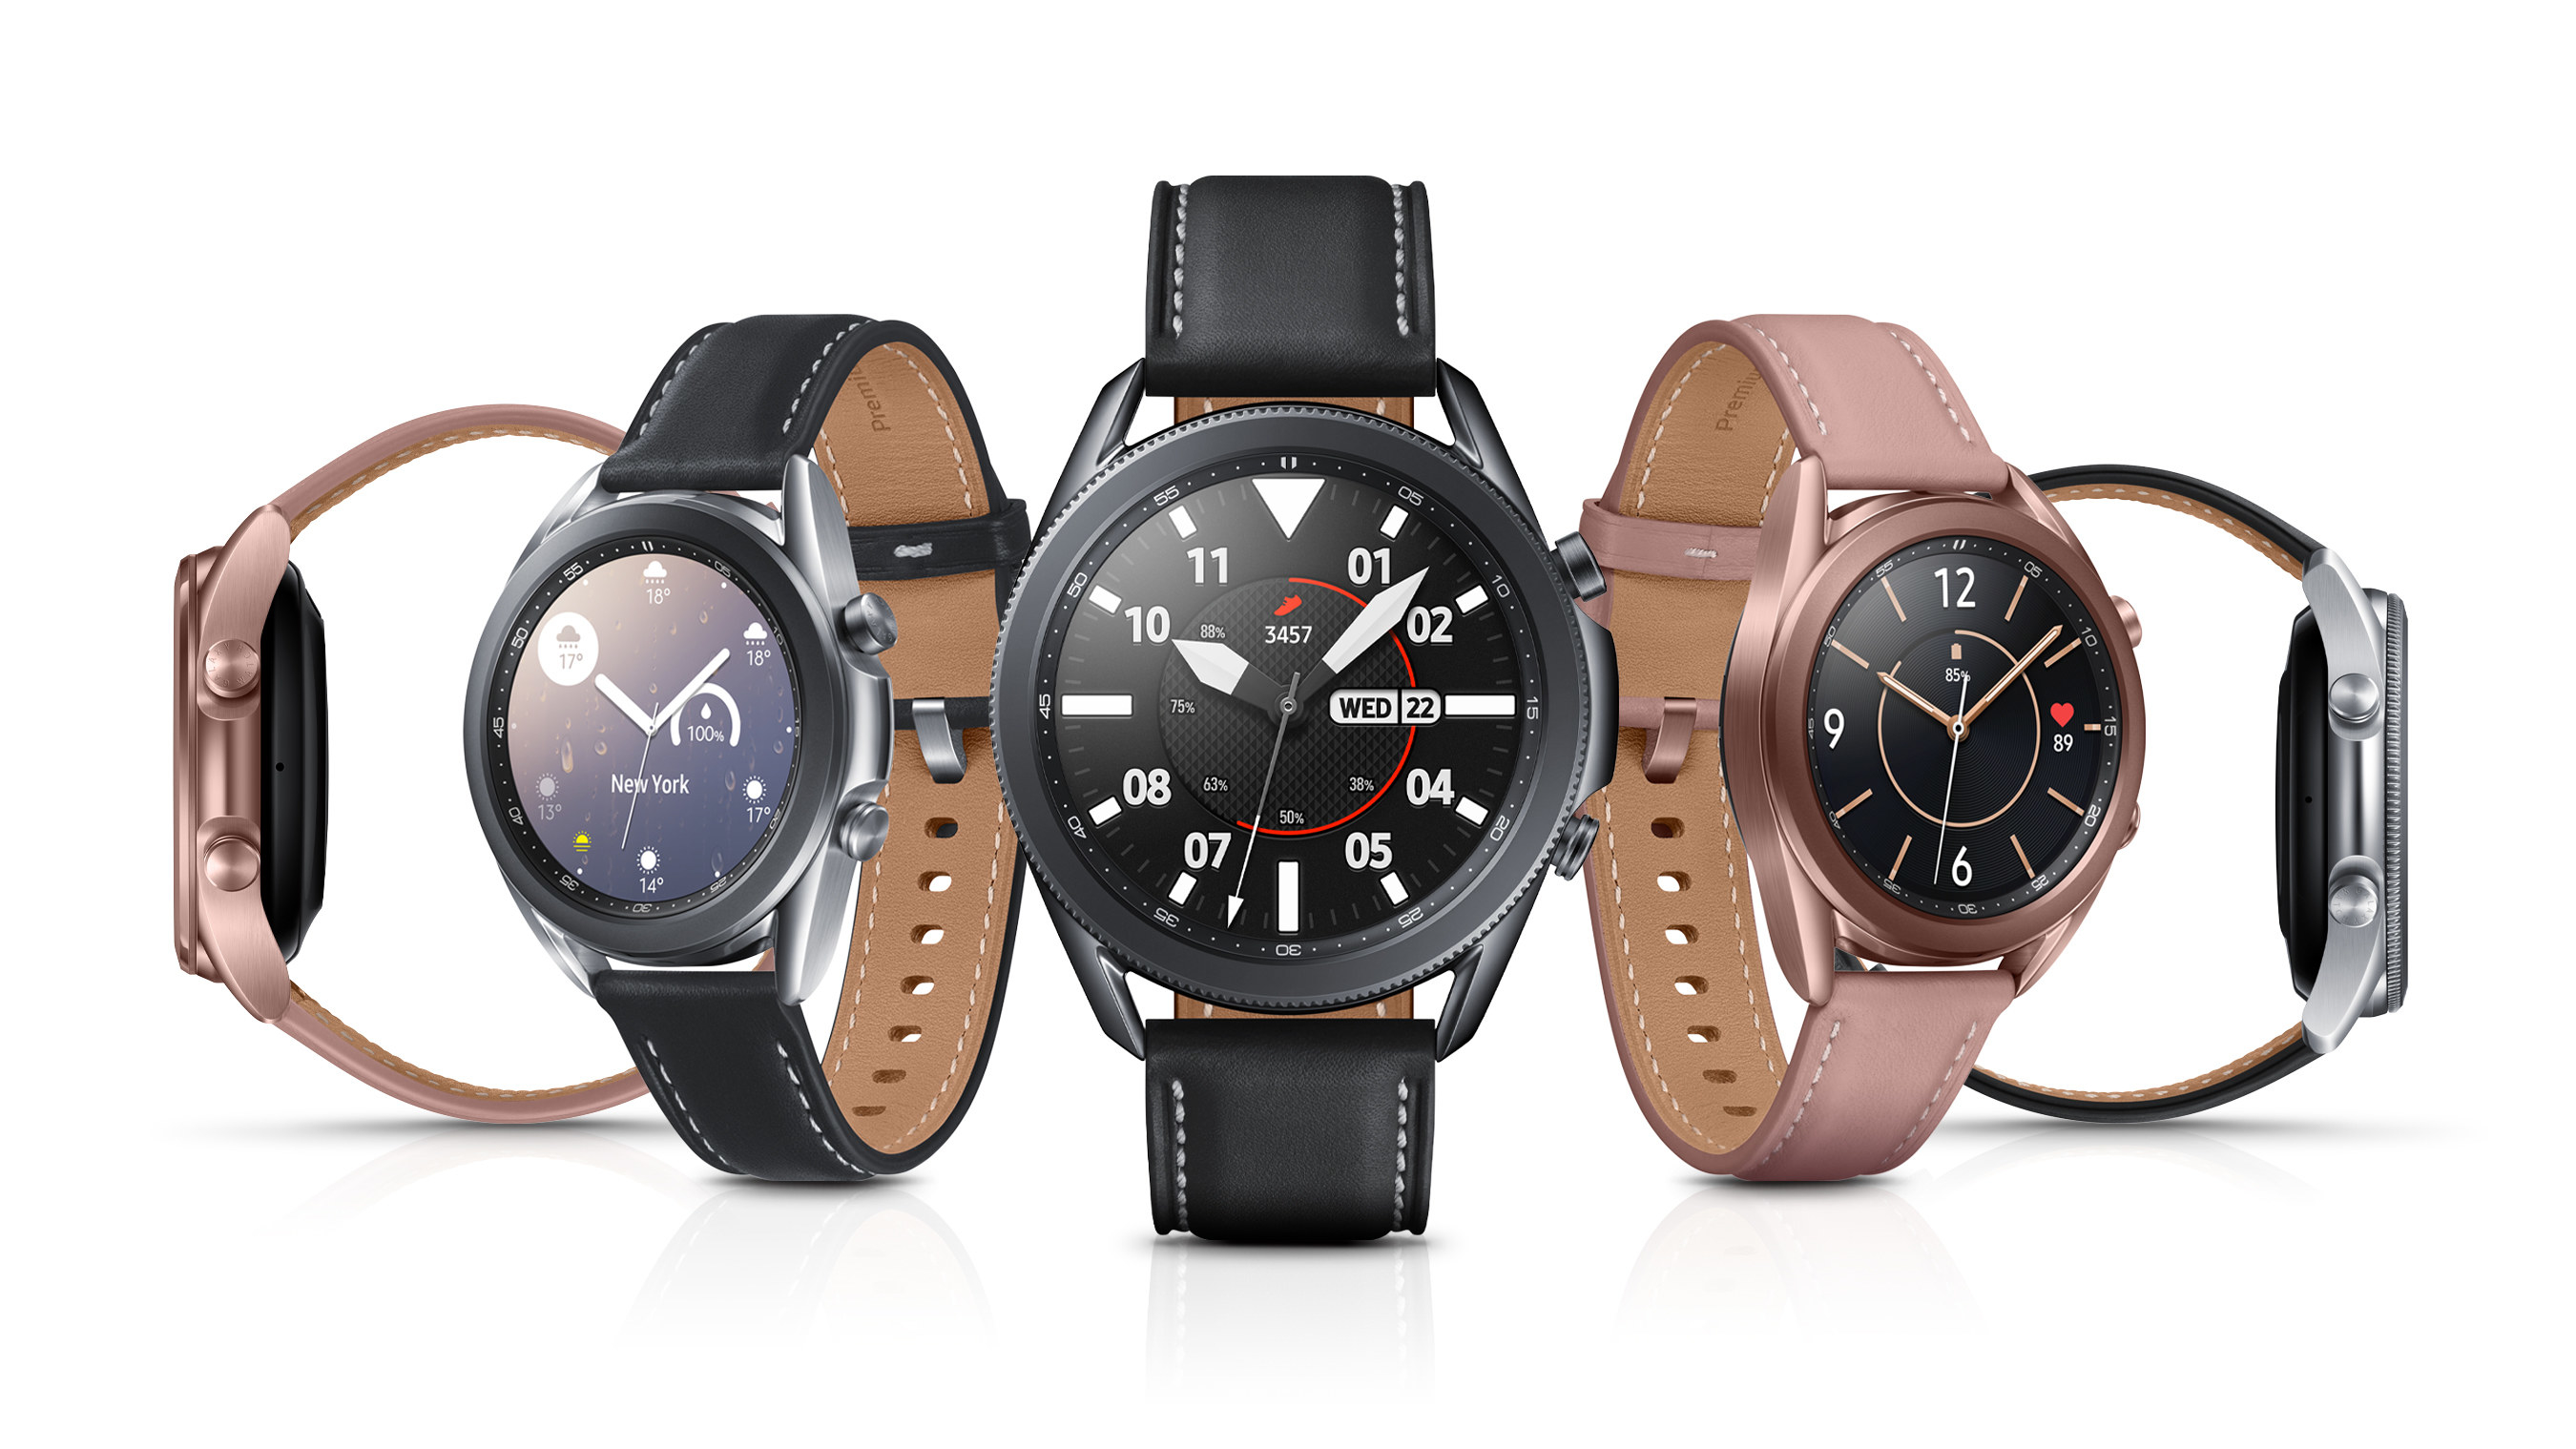 The Samsung Galaxy Watch3 in various sizes and Mystic Black, Mystic Silver, and Mystic Bronze colors with different customizable watch faces